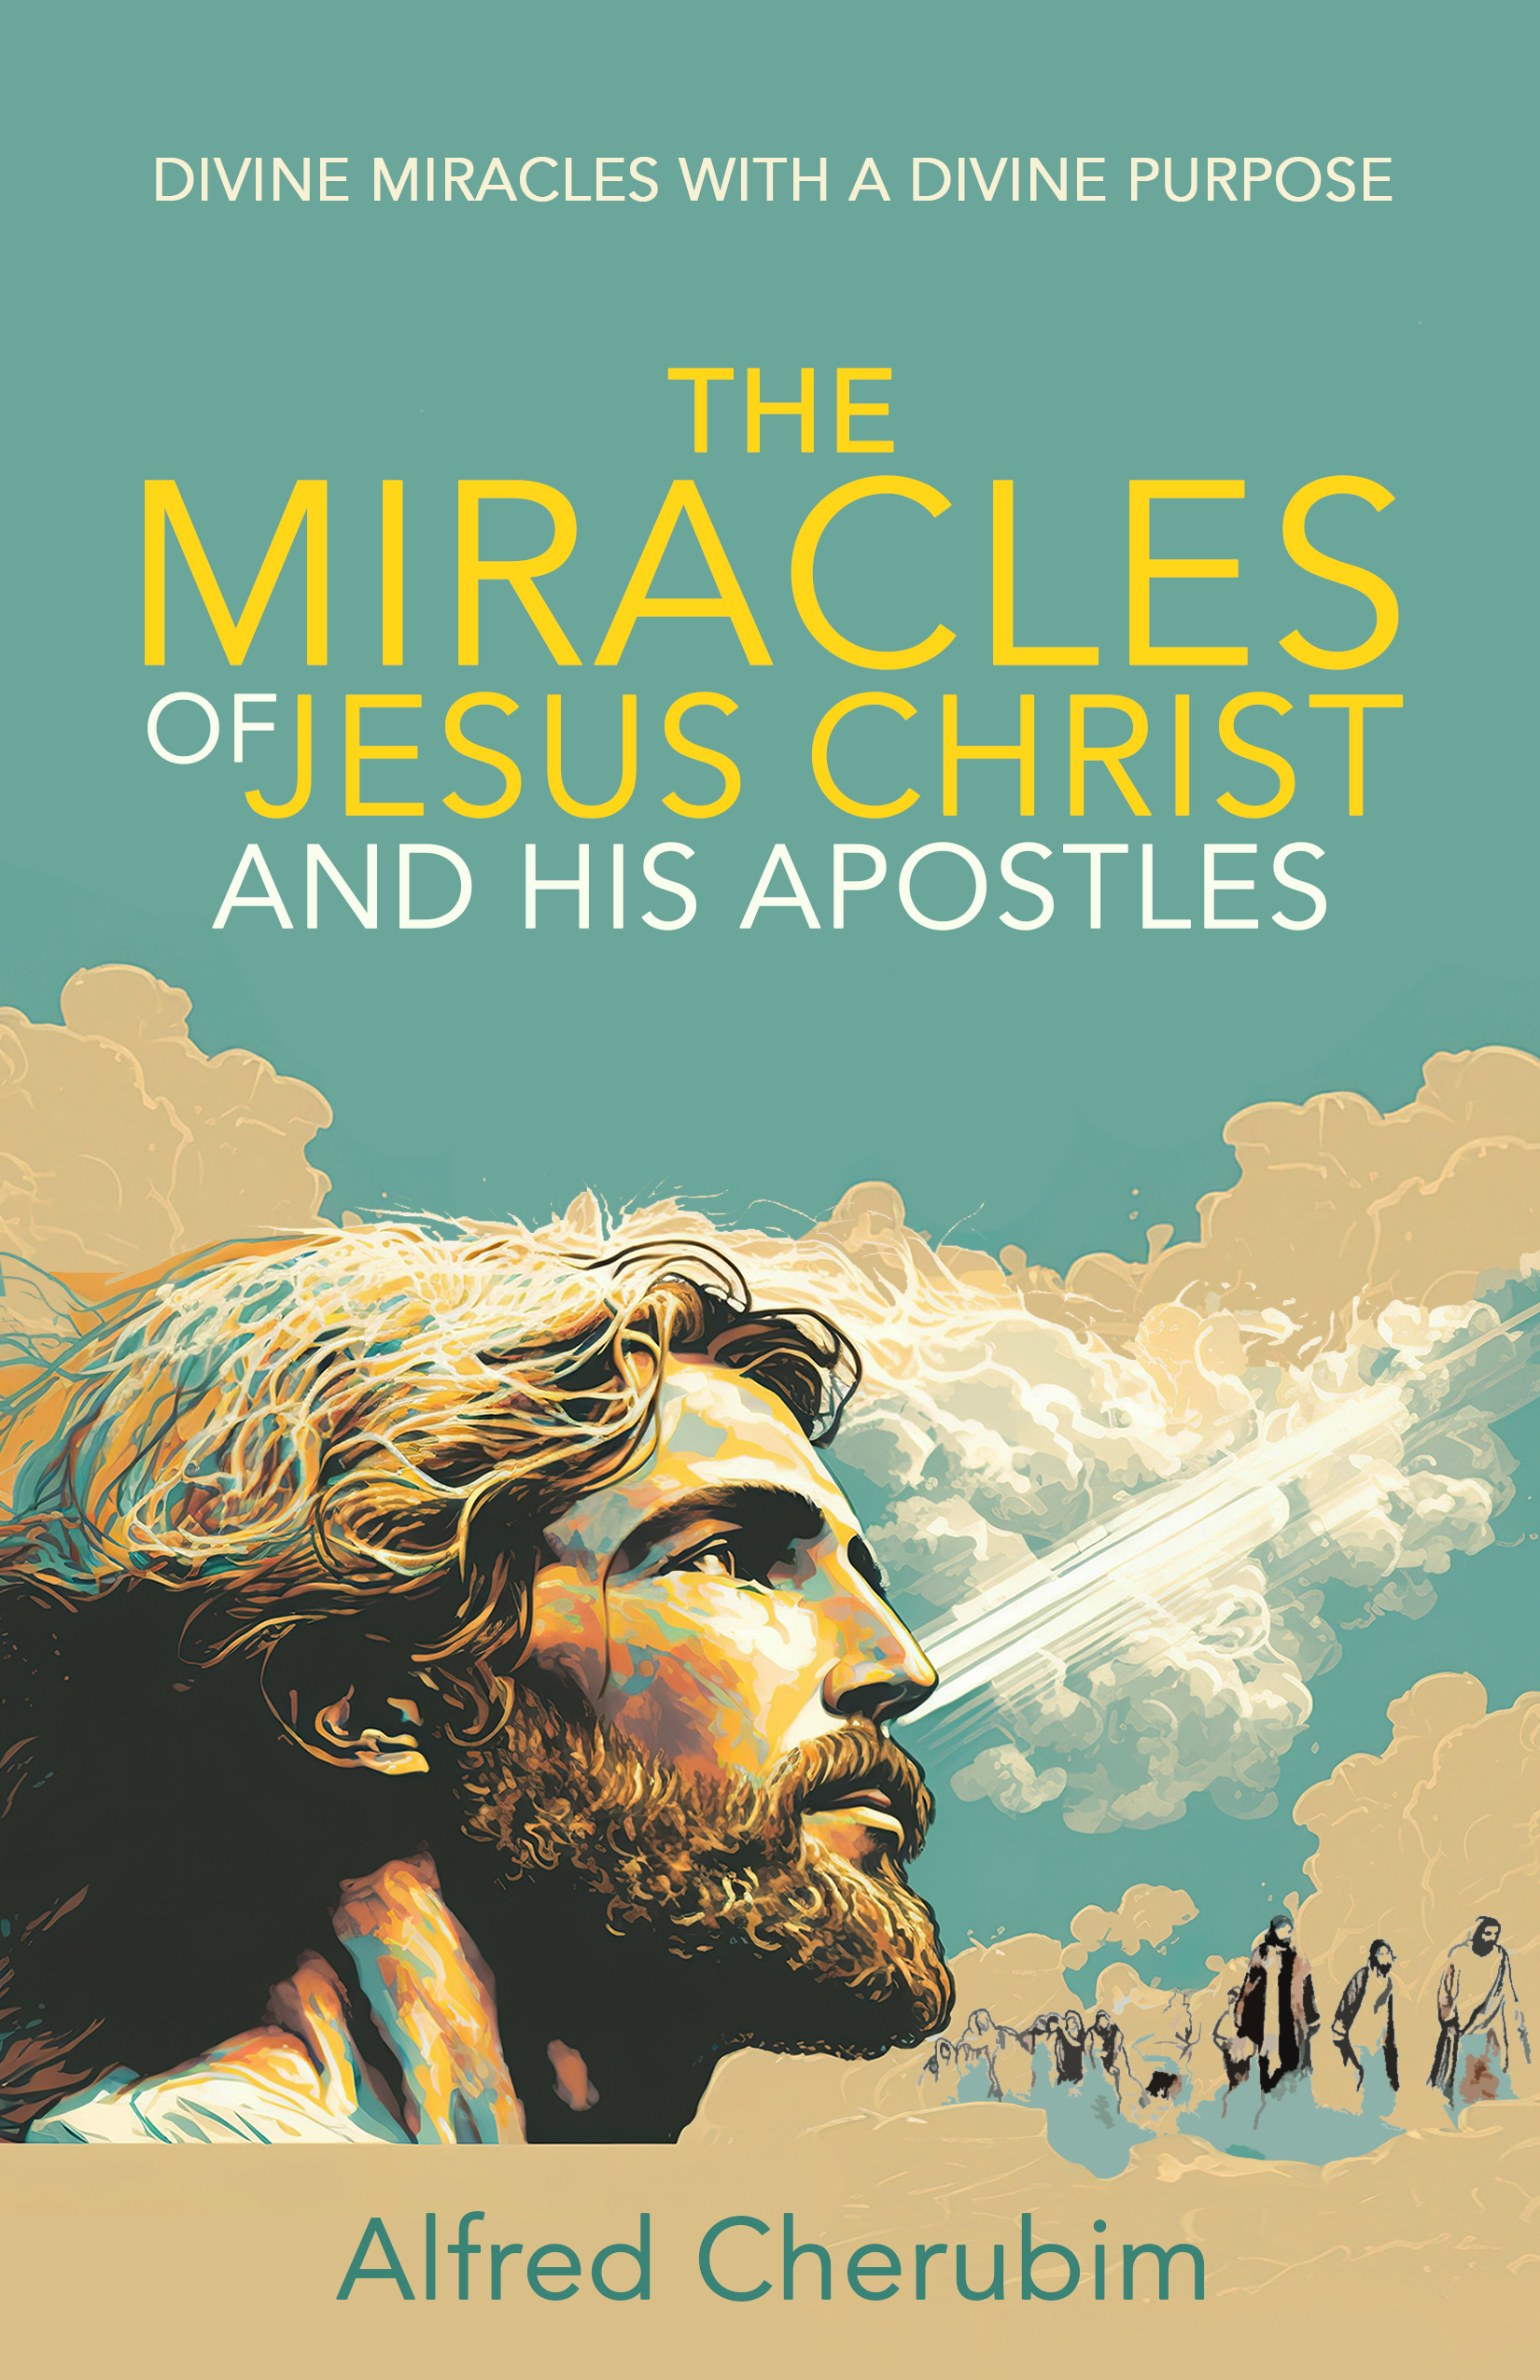 Front - The Miracles of Jesus Christ and His Apostles in the Bible - Alfred Cherubim